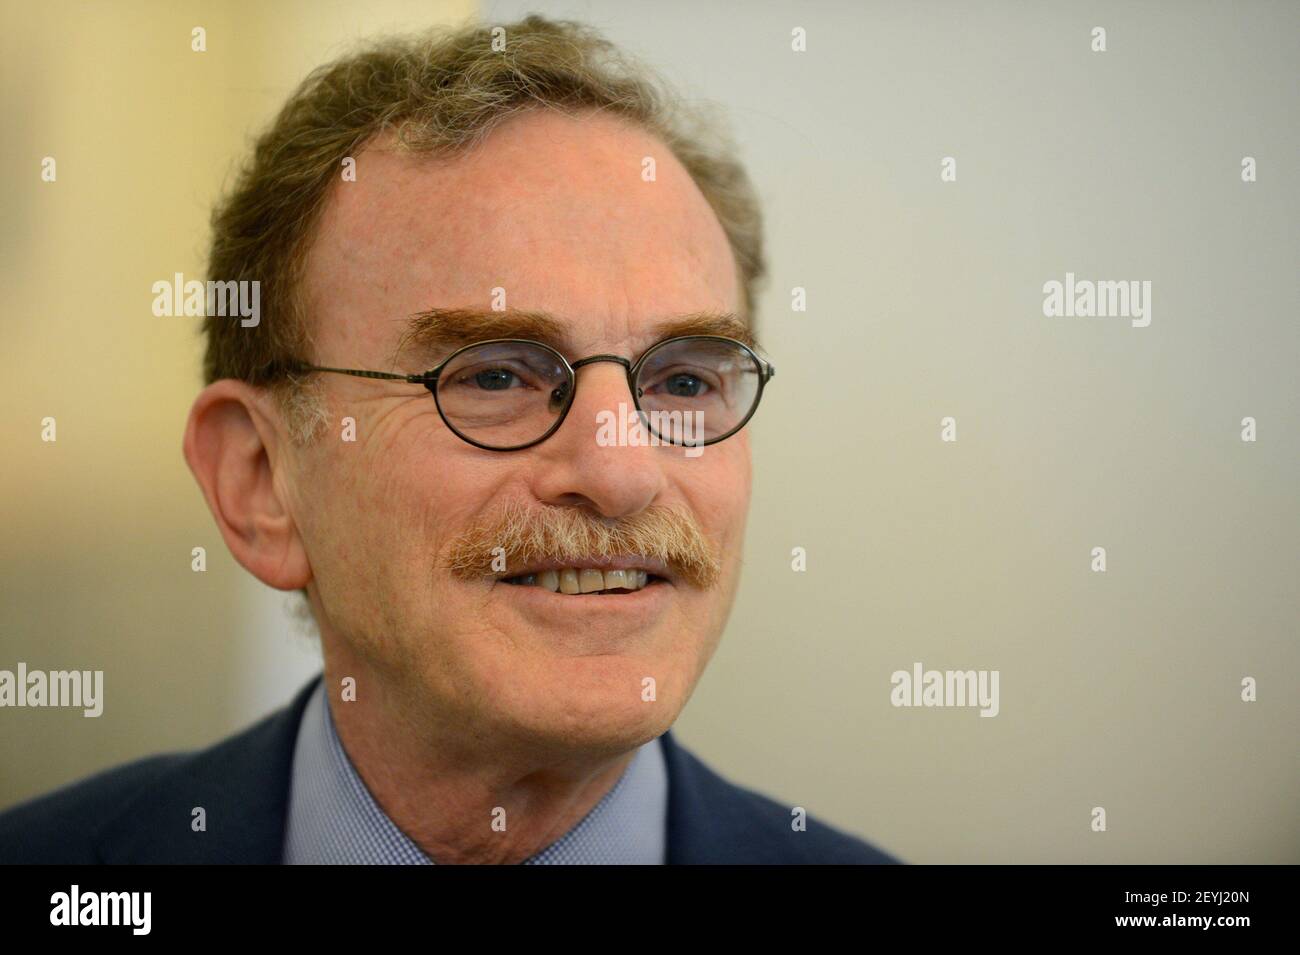 Randy Schekman, professor of molecular and cell biology at the University  of California at Berkeley, speaks during a press conference in Berkeley,  California October 7, 2013. Americans Schekman and James Rothman and